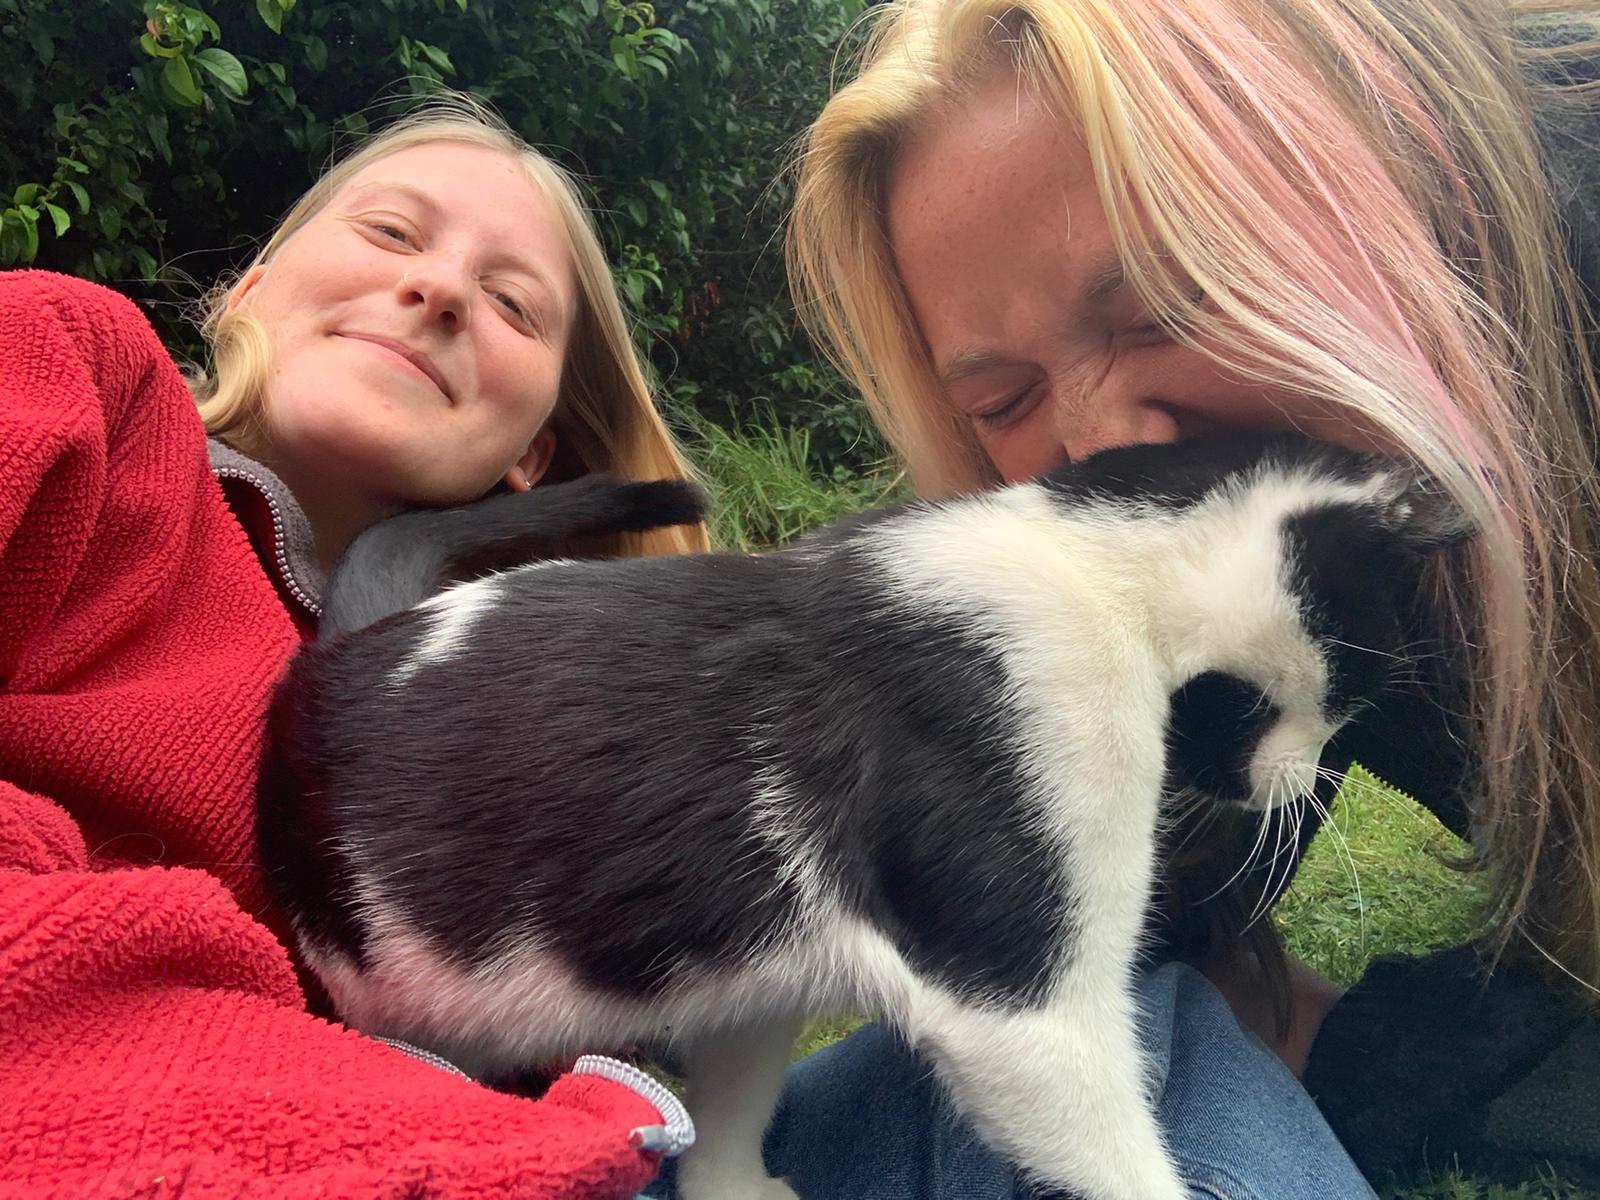 Two women and a black and white cat.